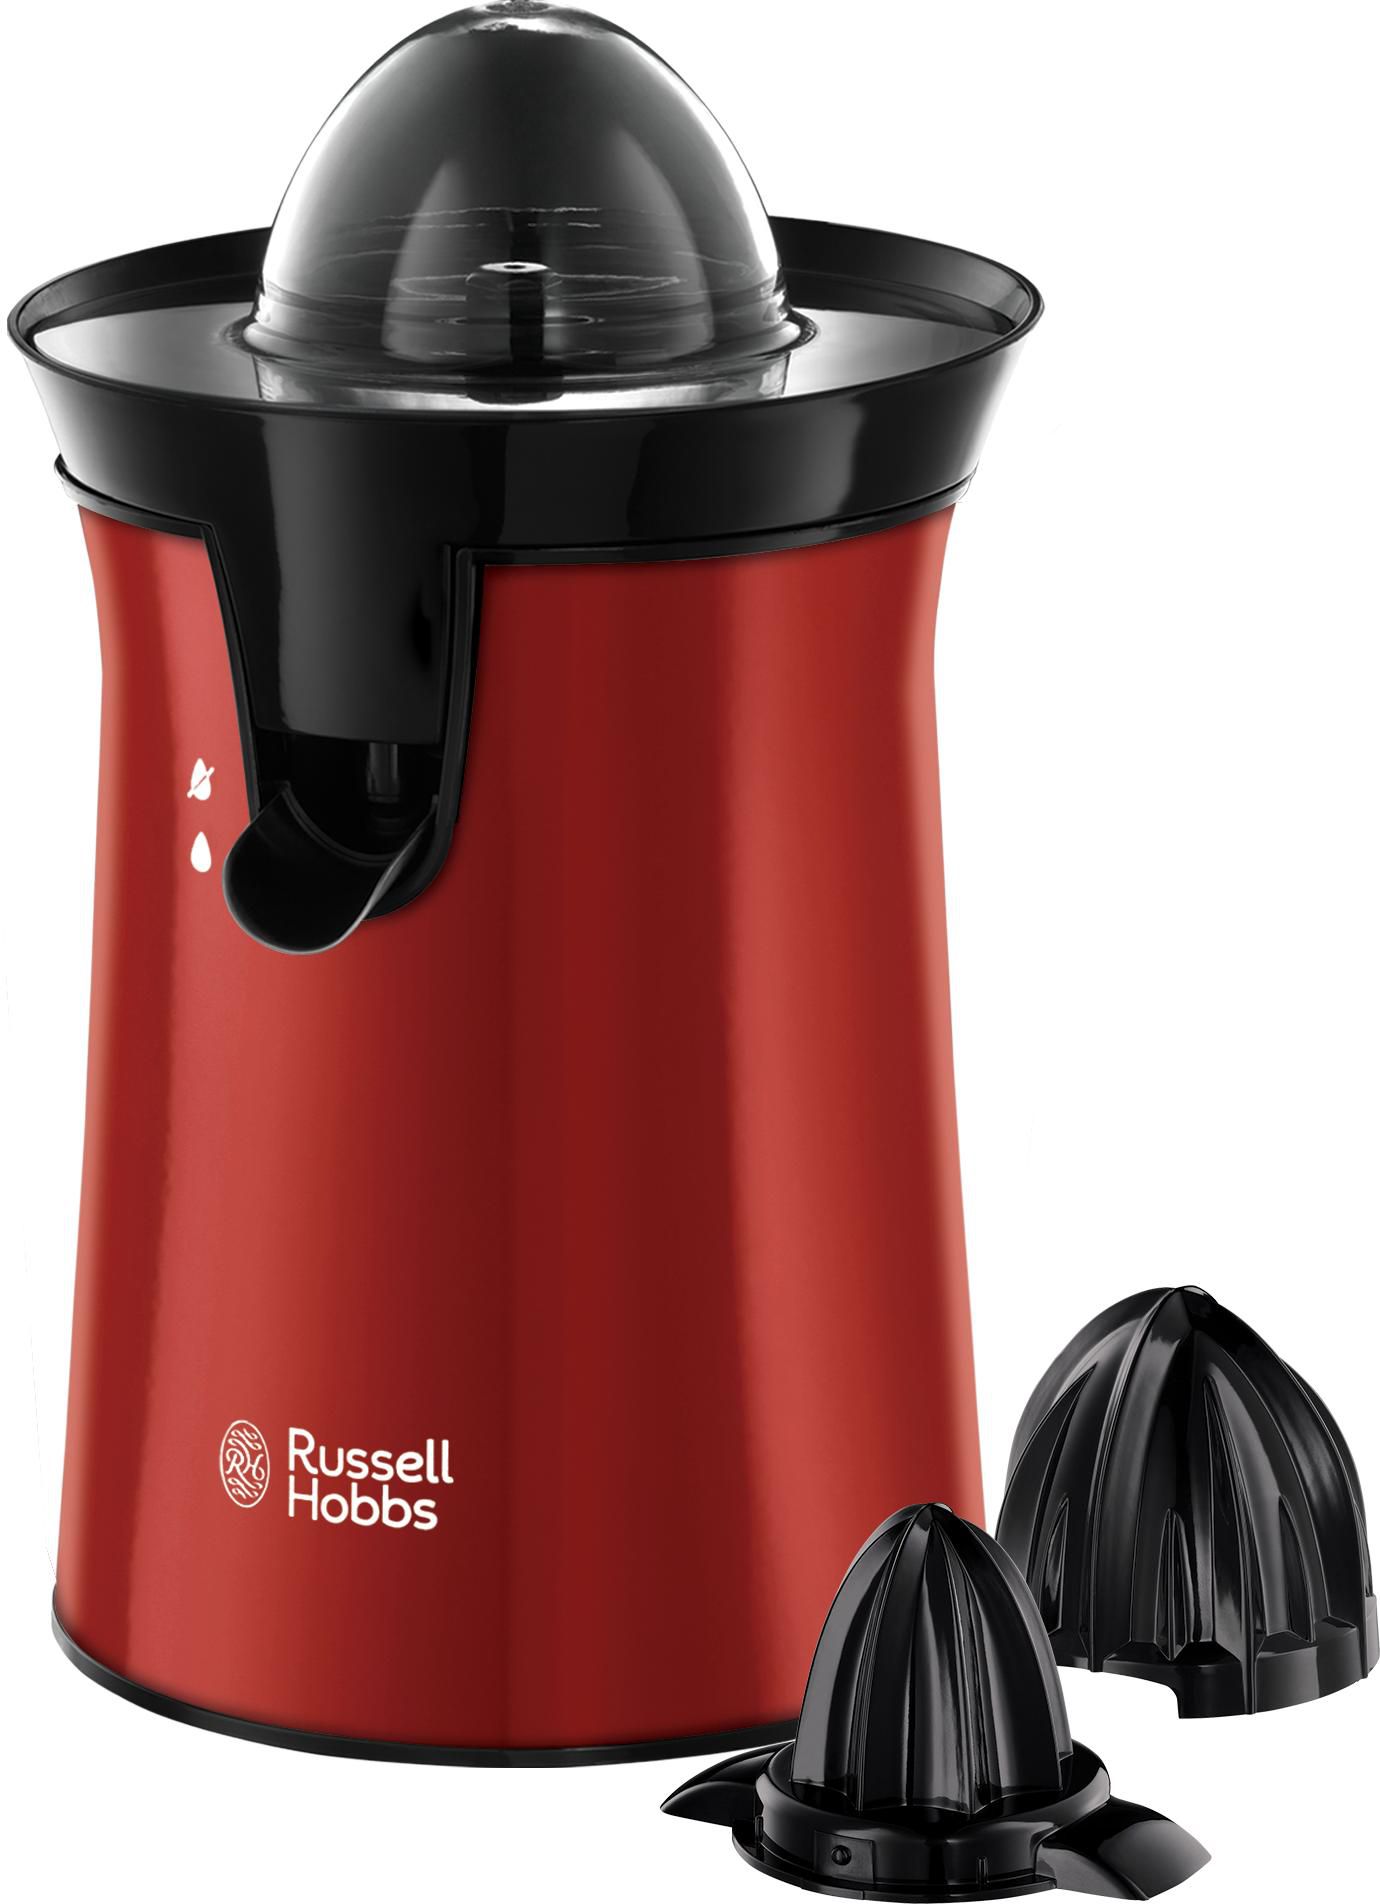 Russell Hobbs Classic Citrus Press, Stainless Steel Body, 60W, Red